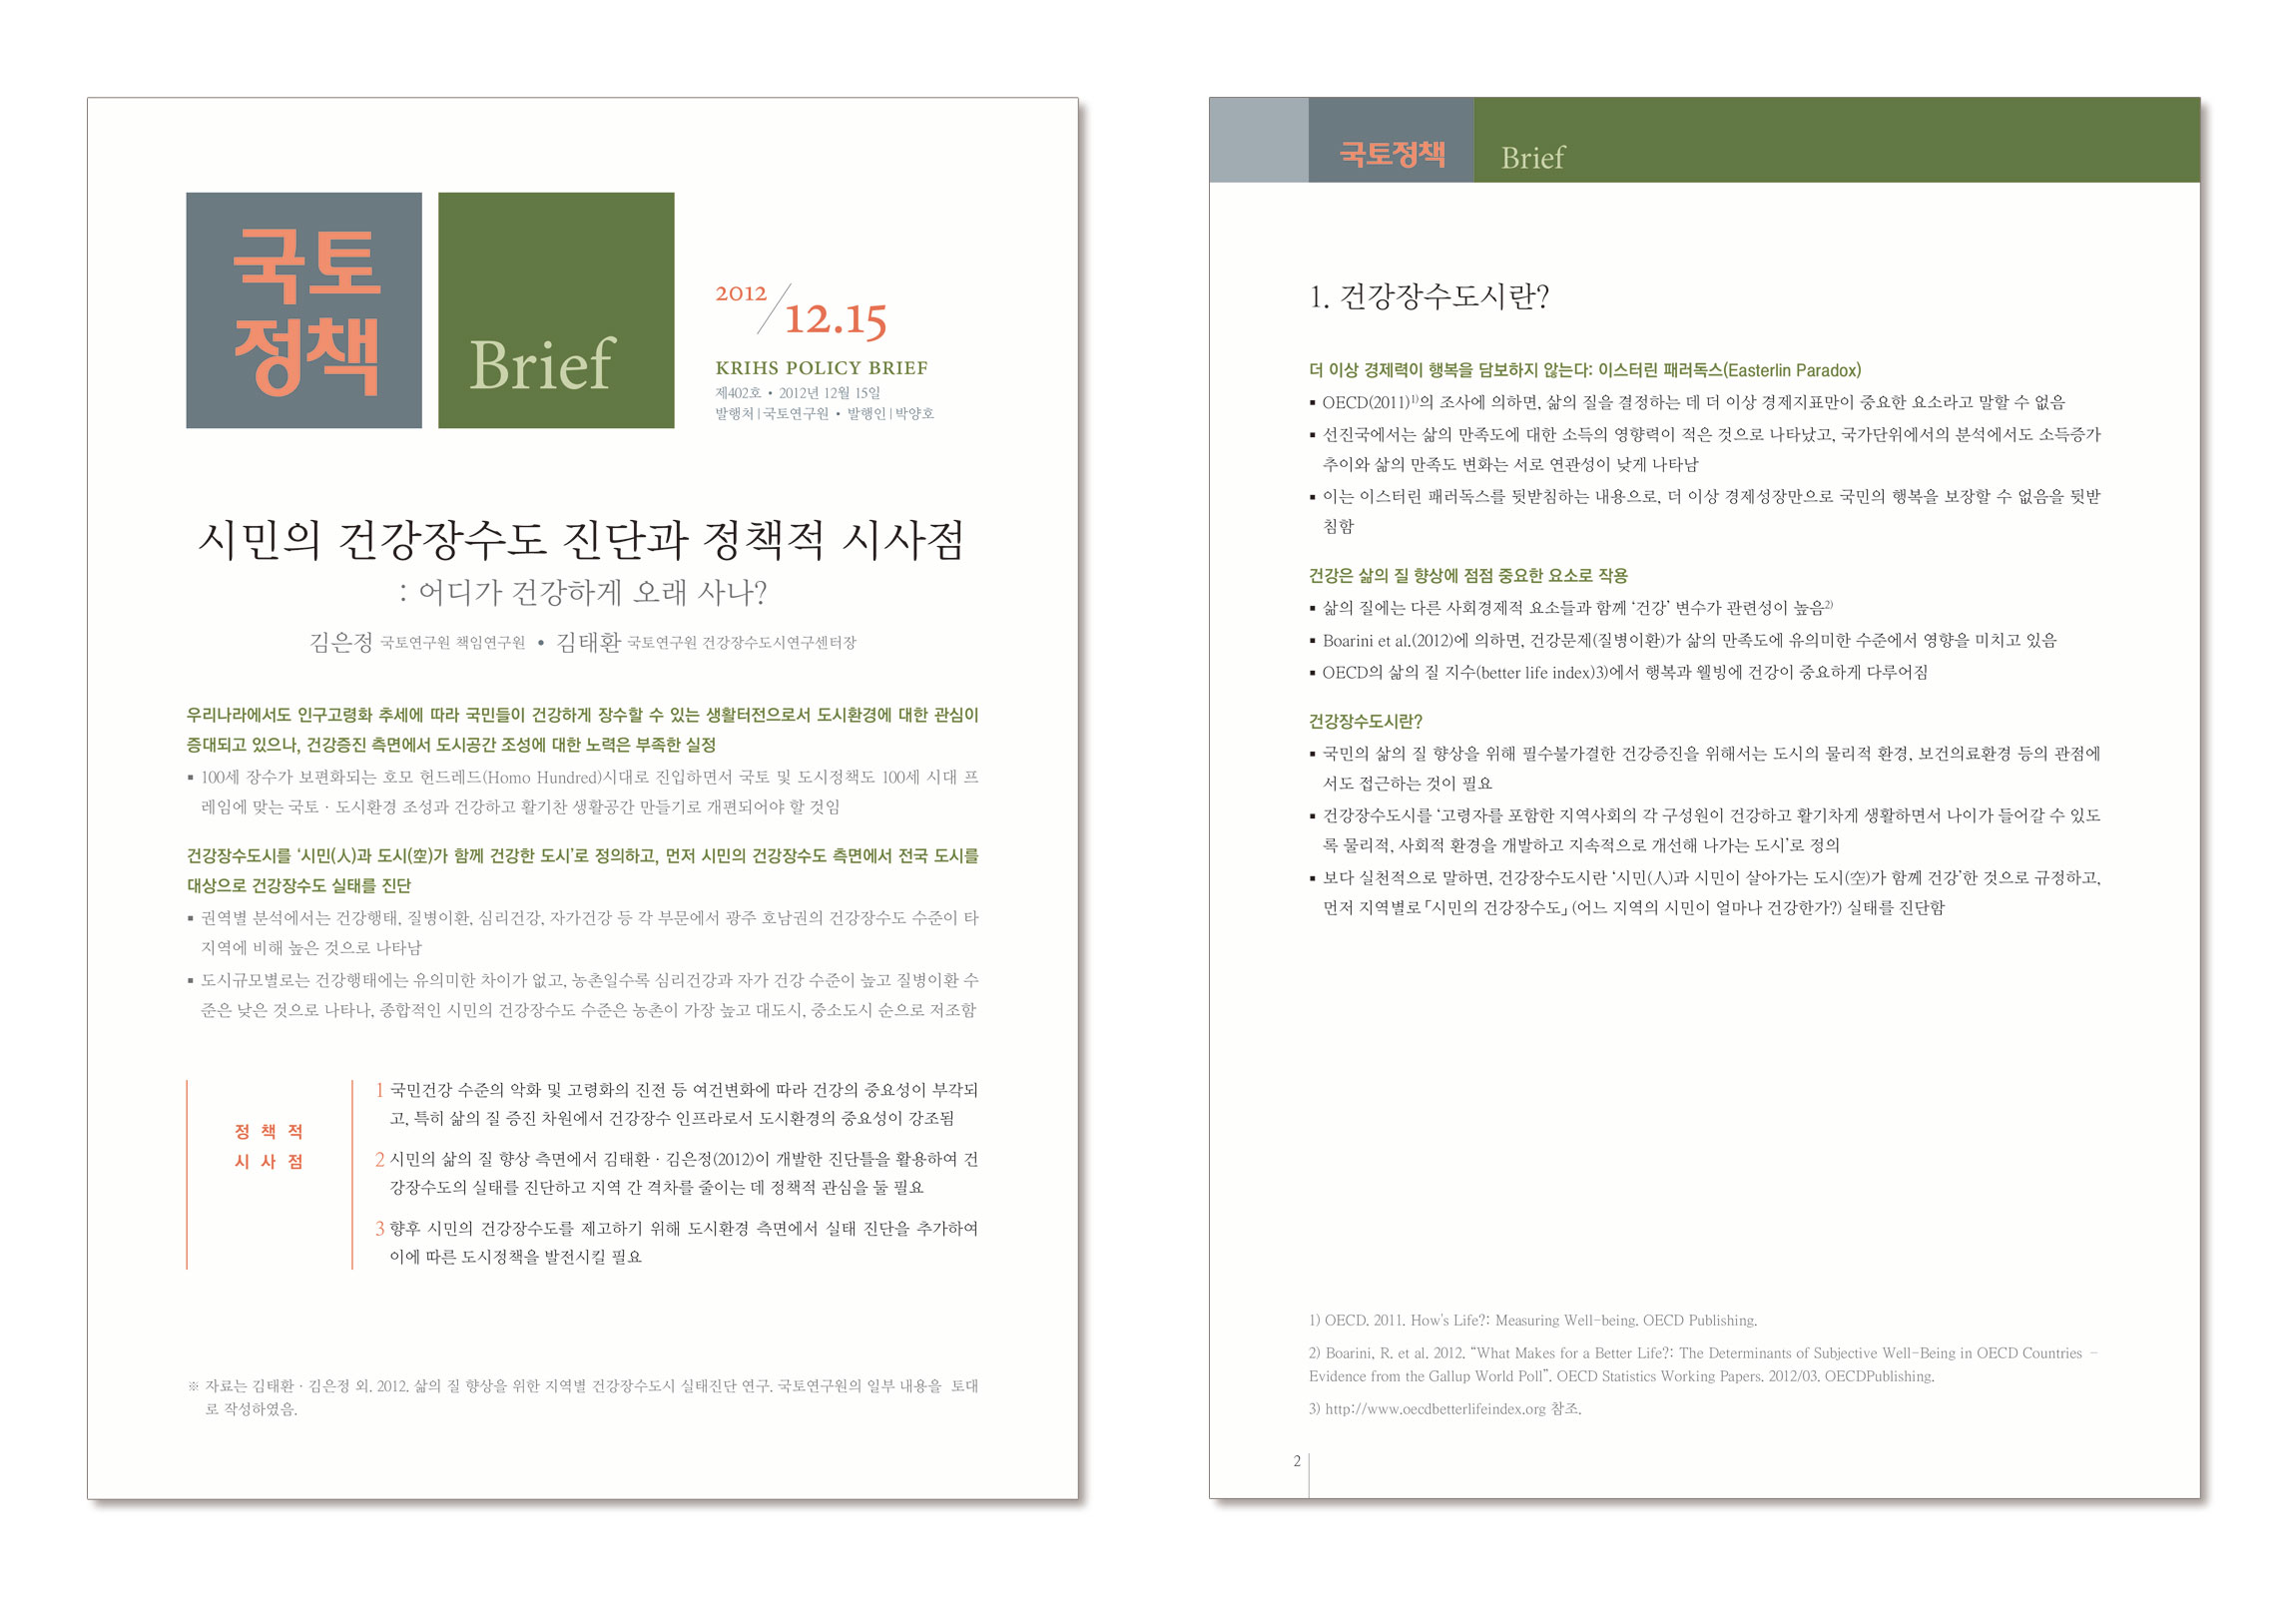 Brief Template for KRIHS